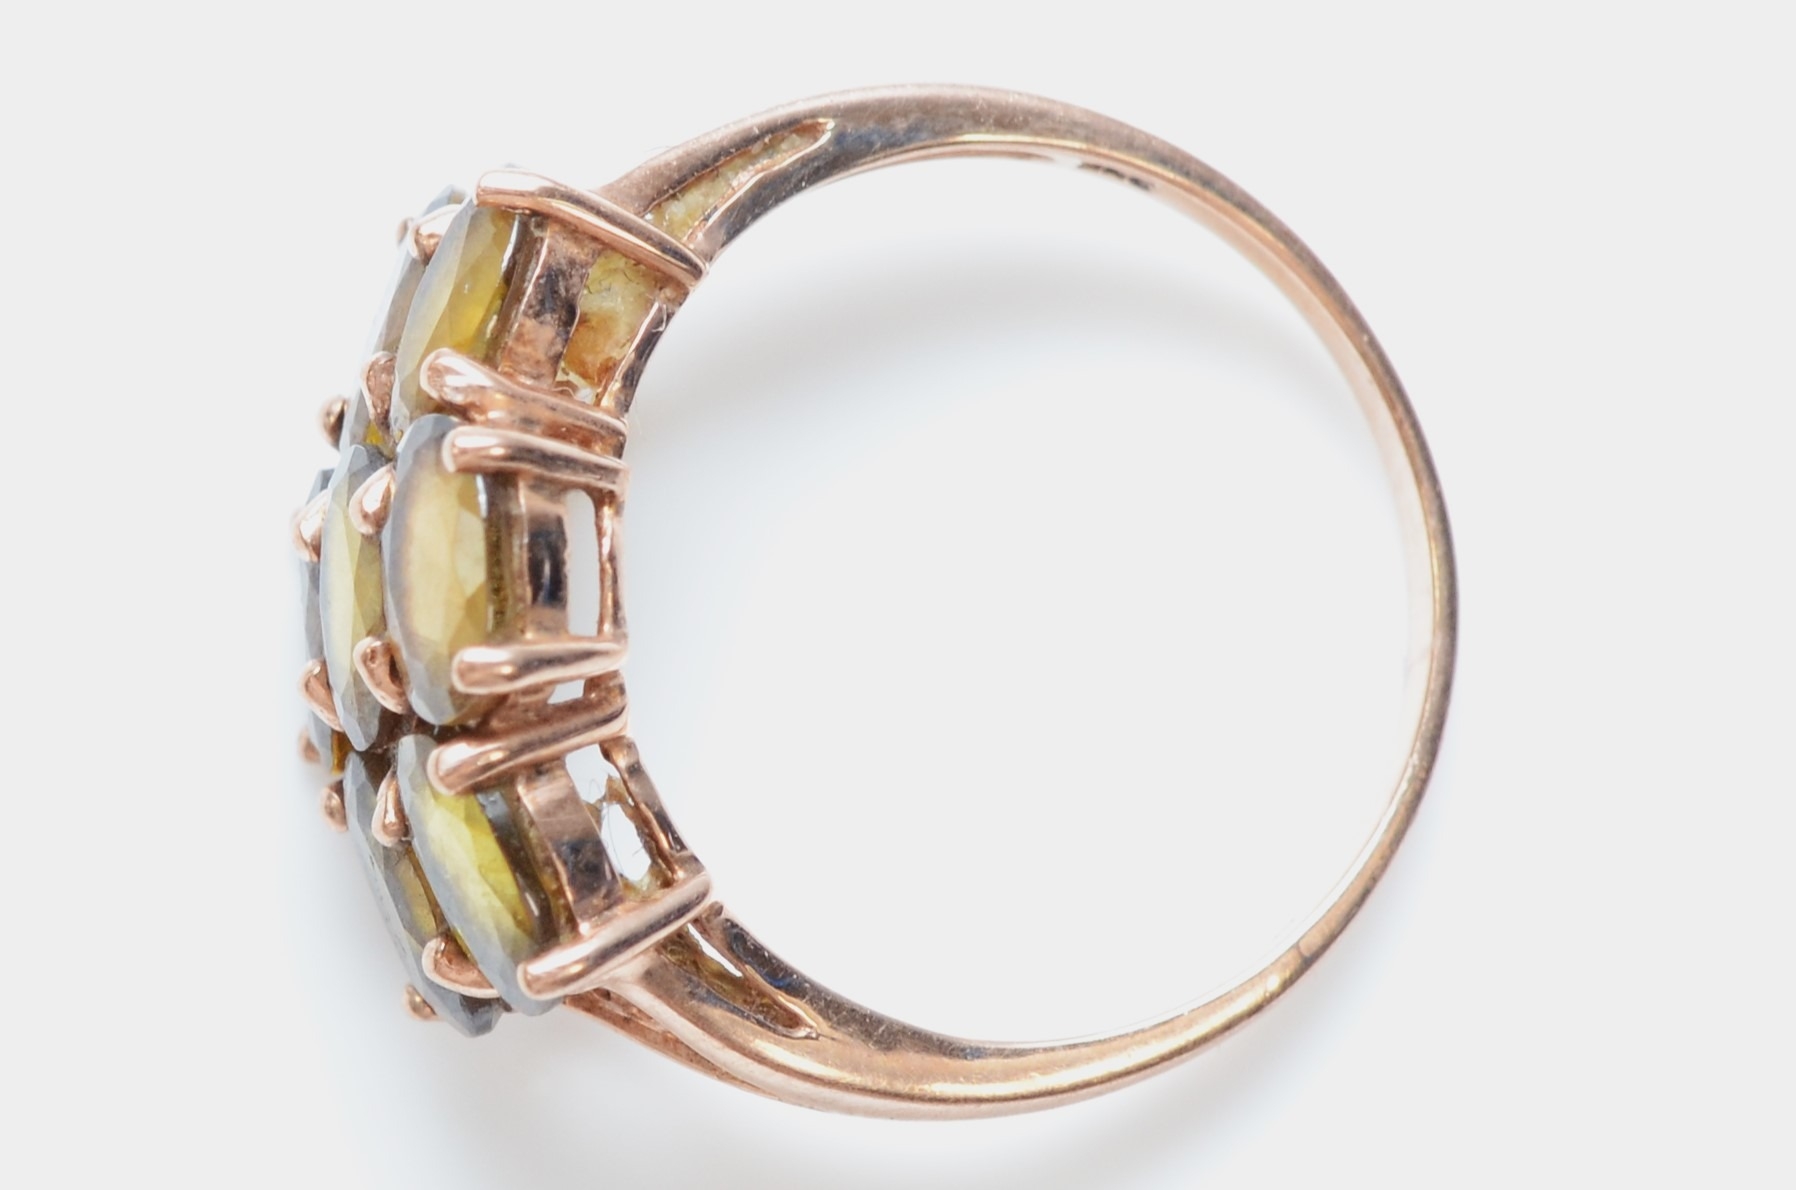 A 9ct gold and brown gemstone ring, N 1/2, 2.9gm - Image 2 of 2